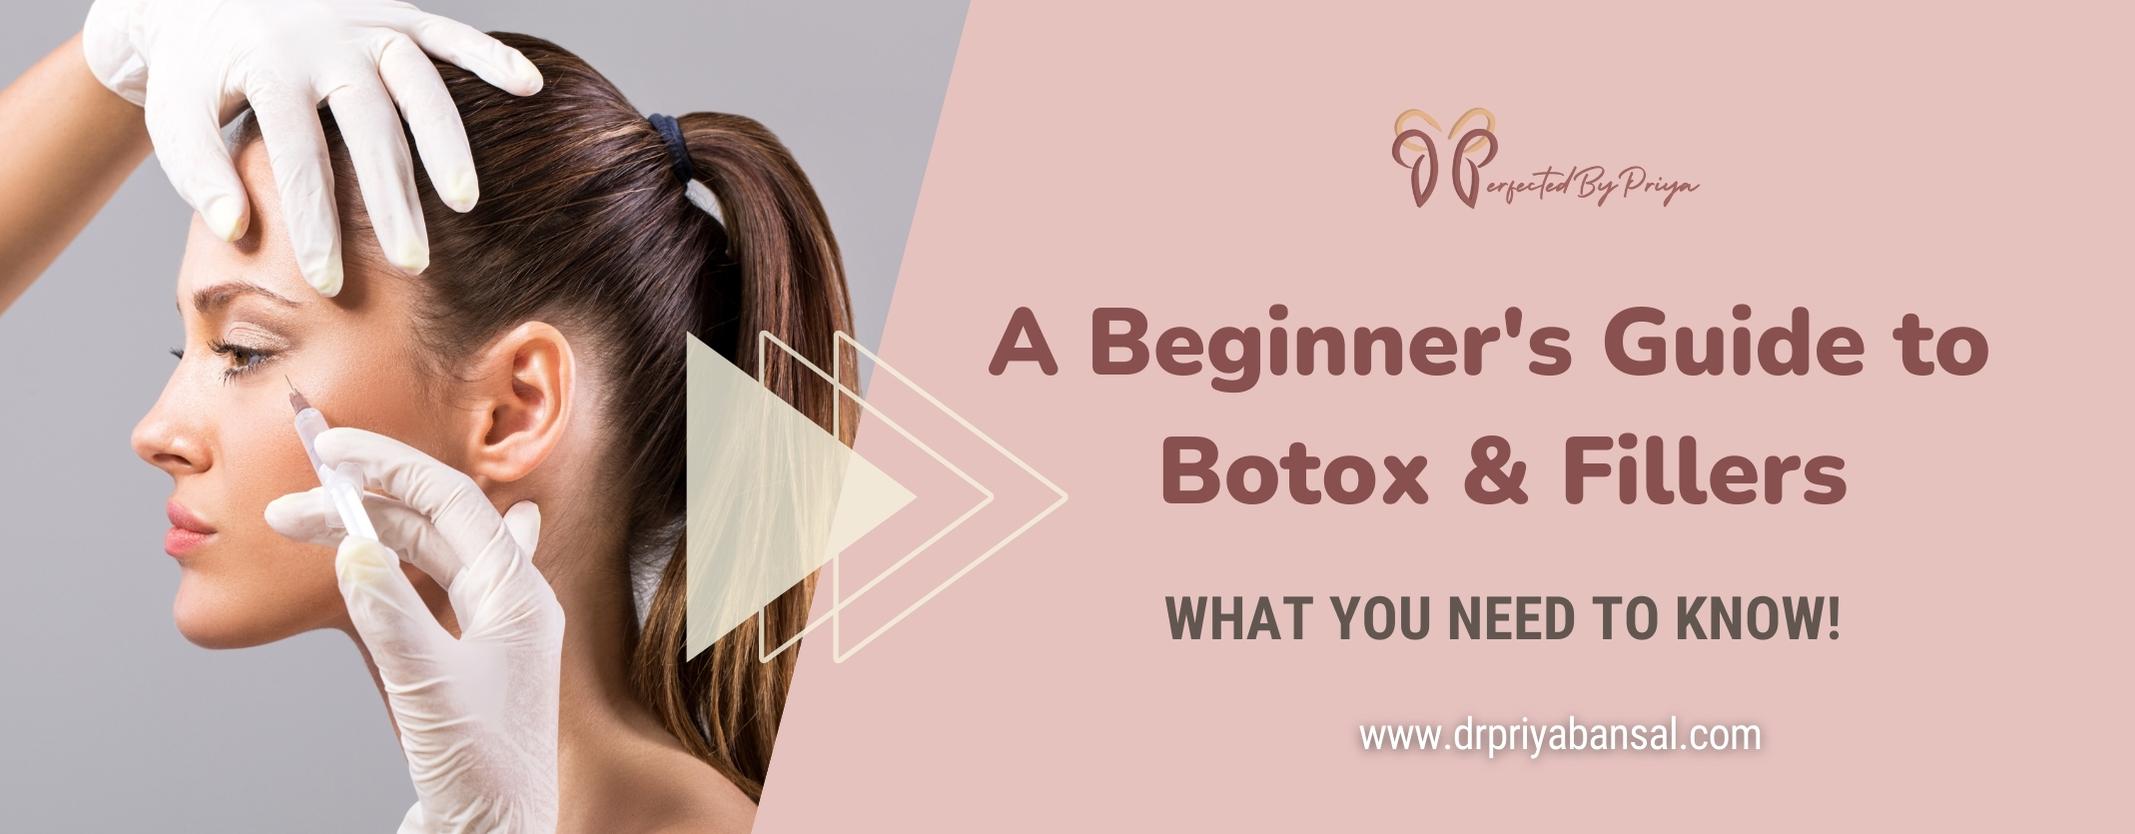 Botox & Fillers Treatment: All You Need to Know